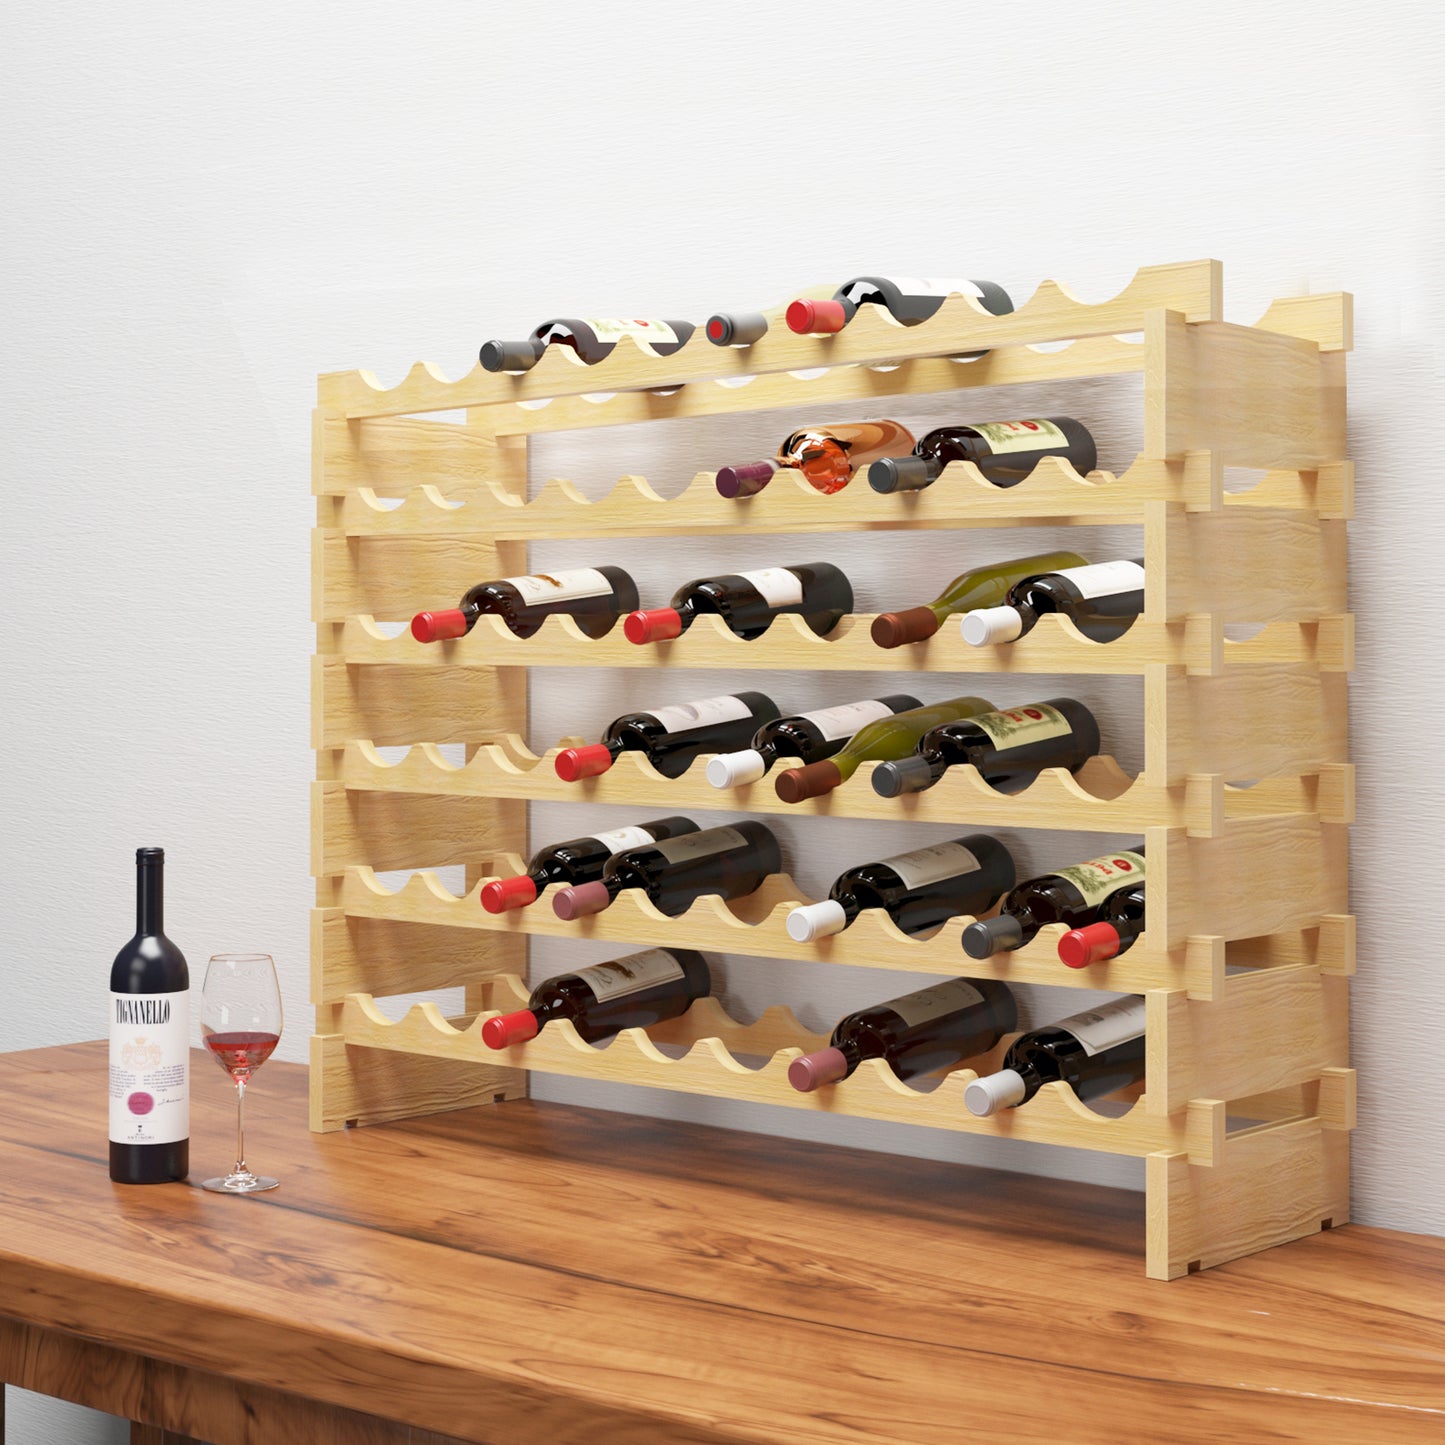 SogesPower Home Solid Wood Wine Rack - Freestanding Storage Display, Four Different Sizes Suitable (60 Bottles, 6 Tiers x 10)